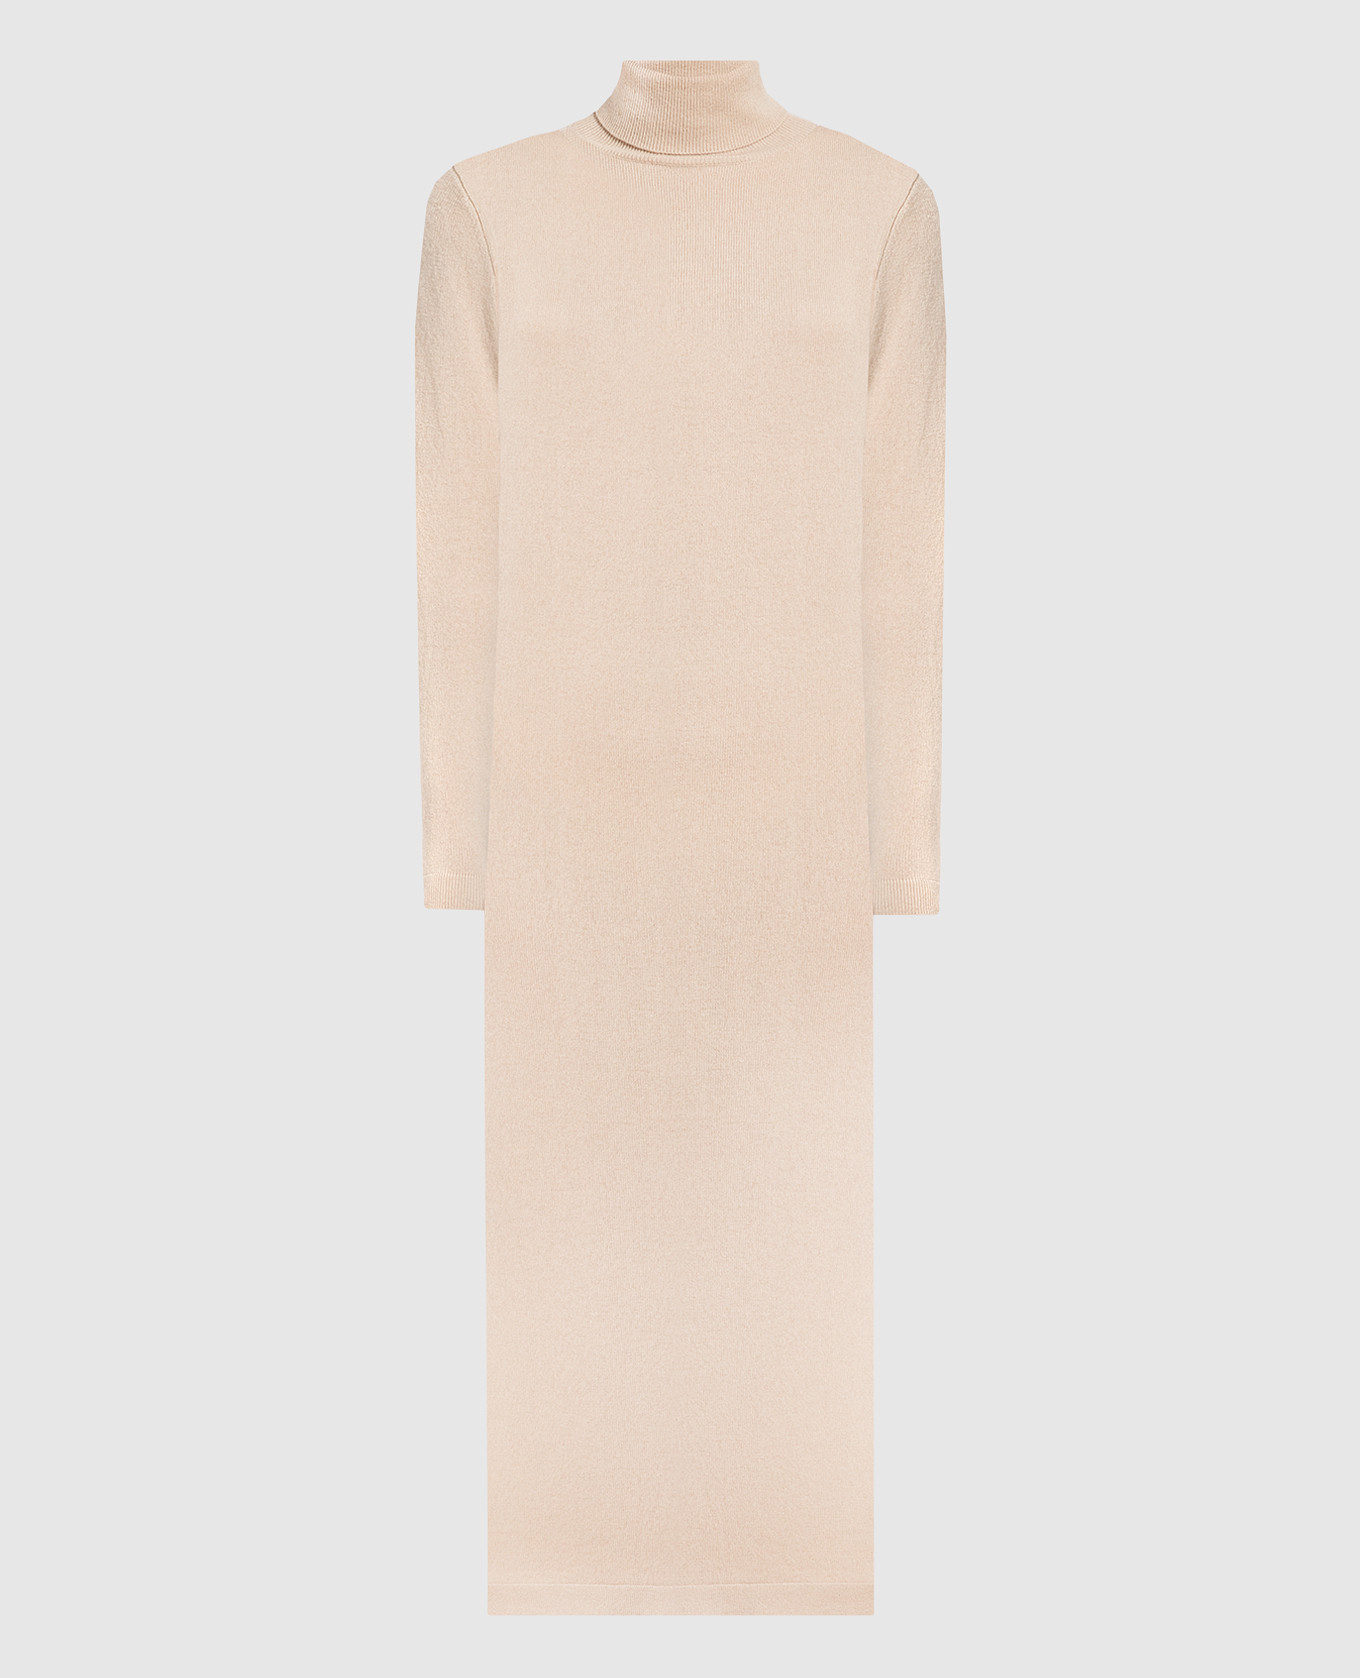 Beige wool and cashmere dress